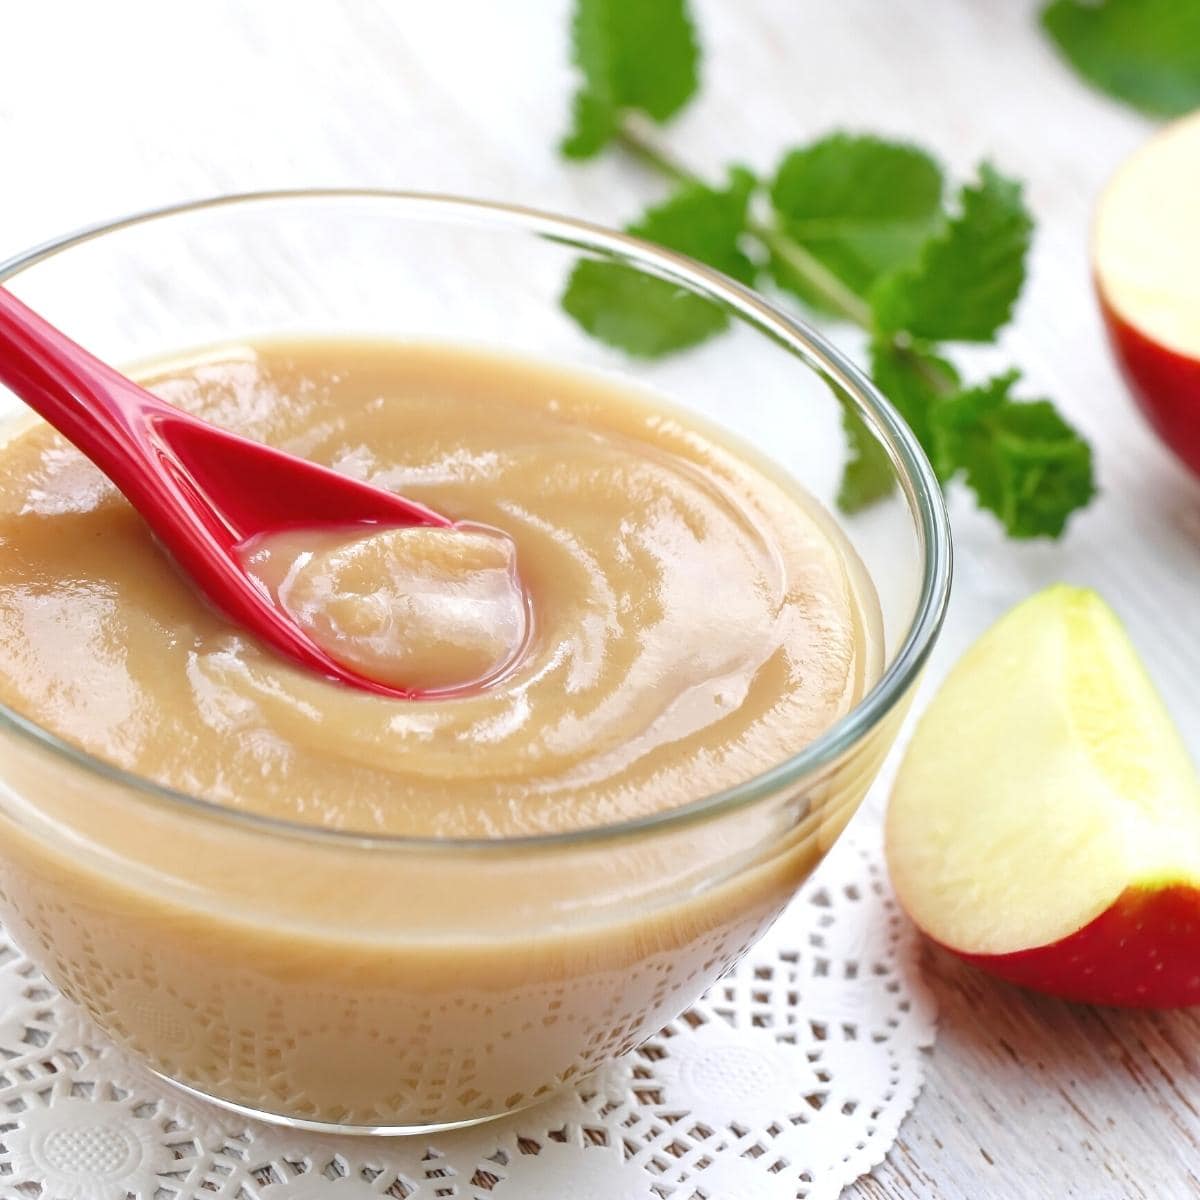 a clear glass bowl of fresh apple puree.